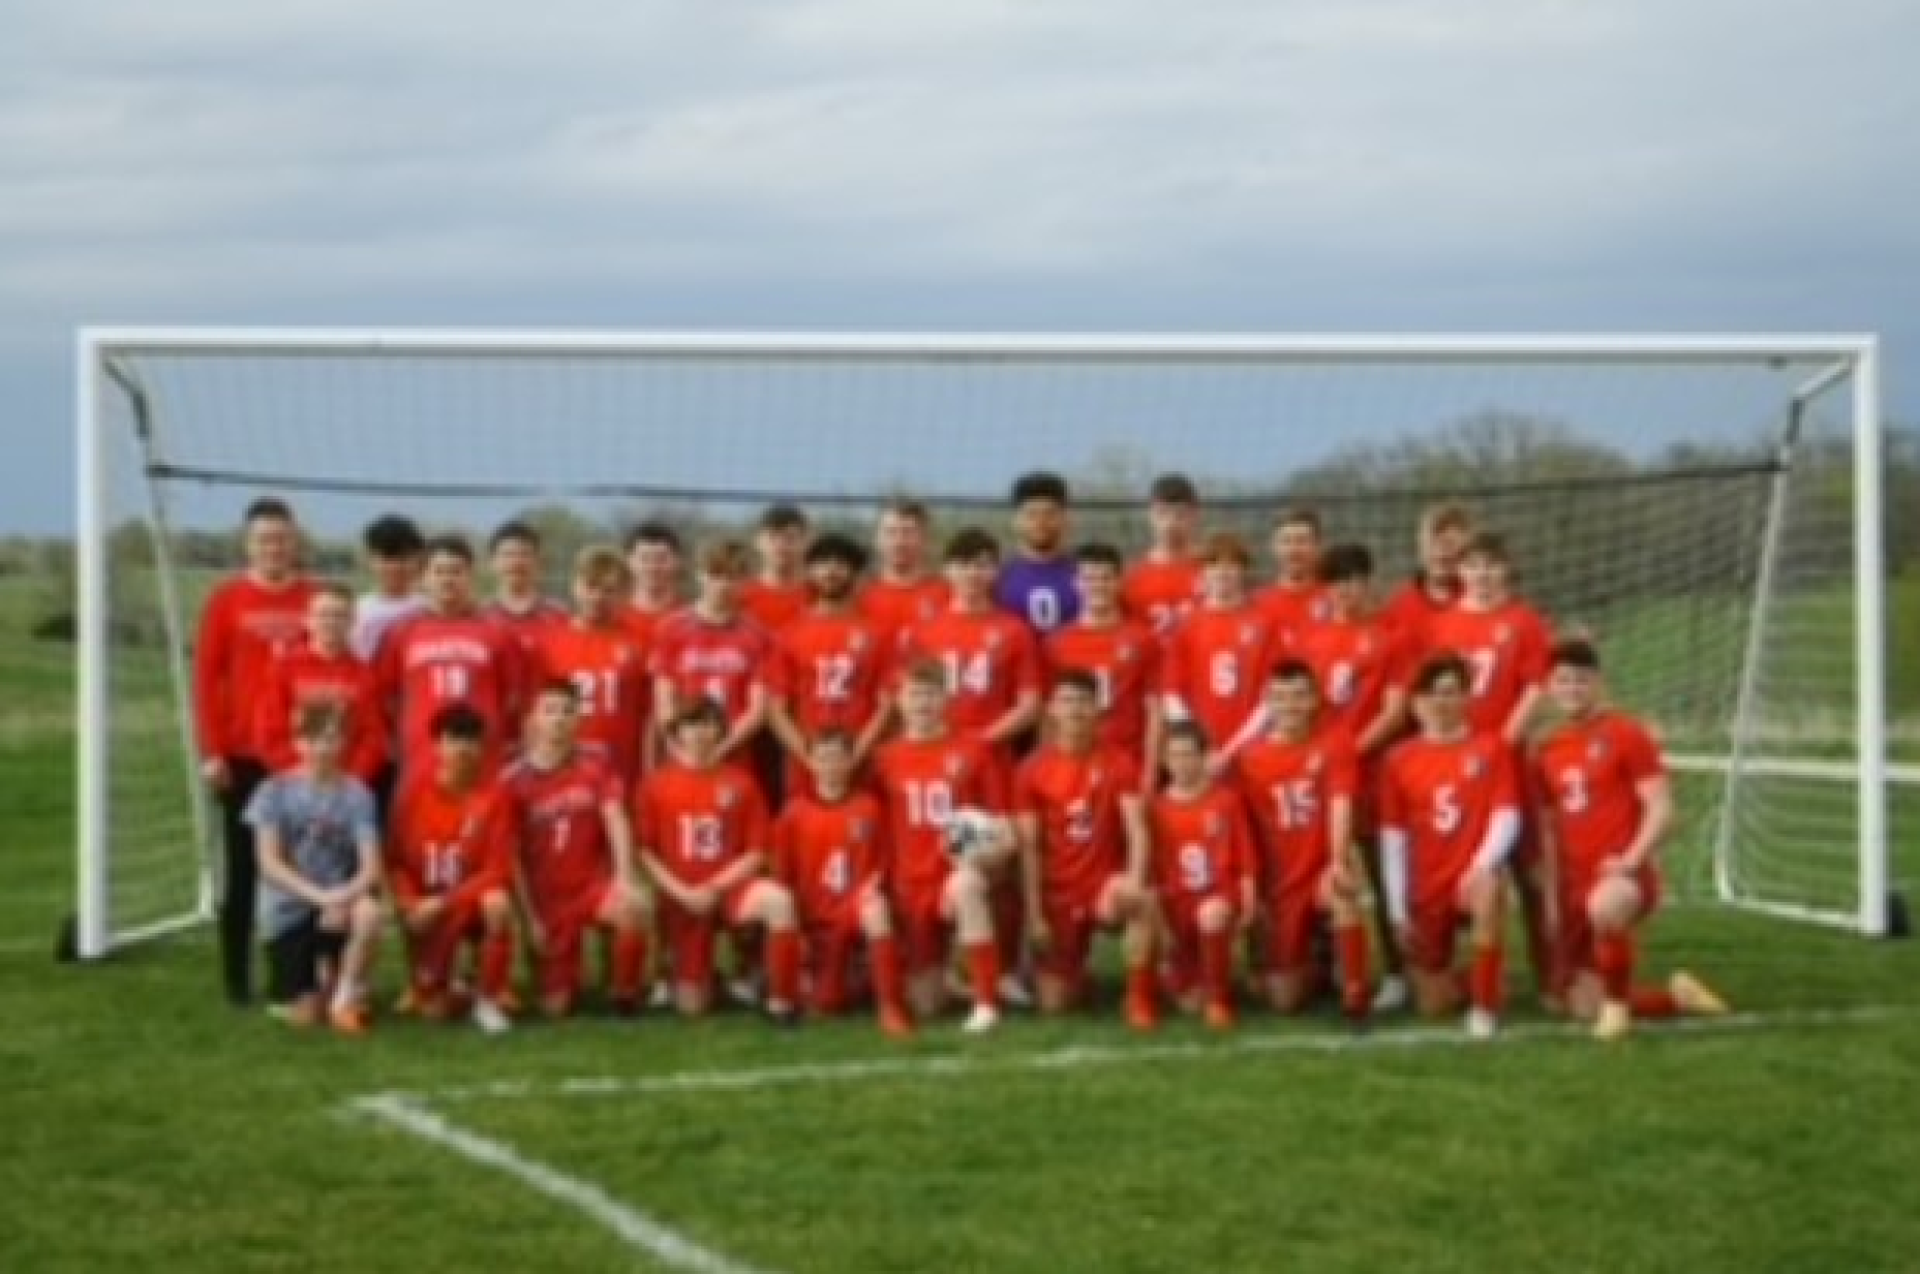 Charger Boys' Soccer team after winning SCC Conference title.